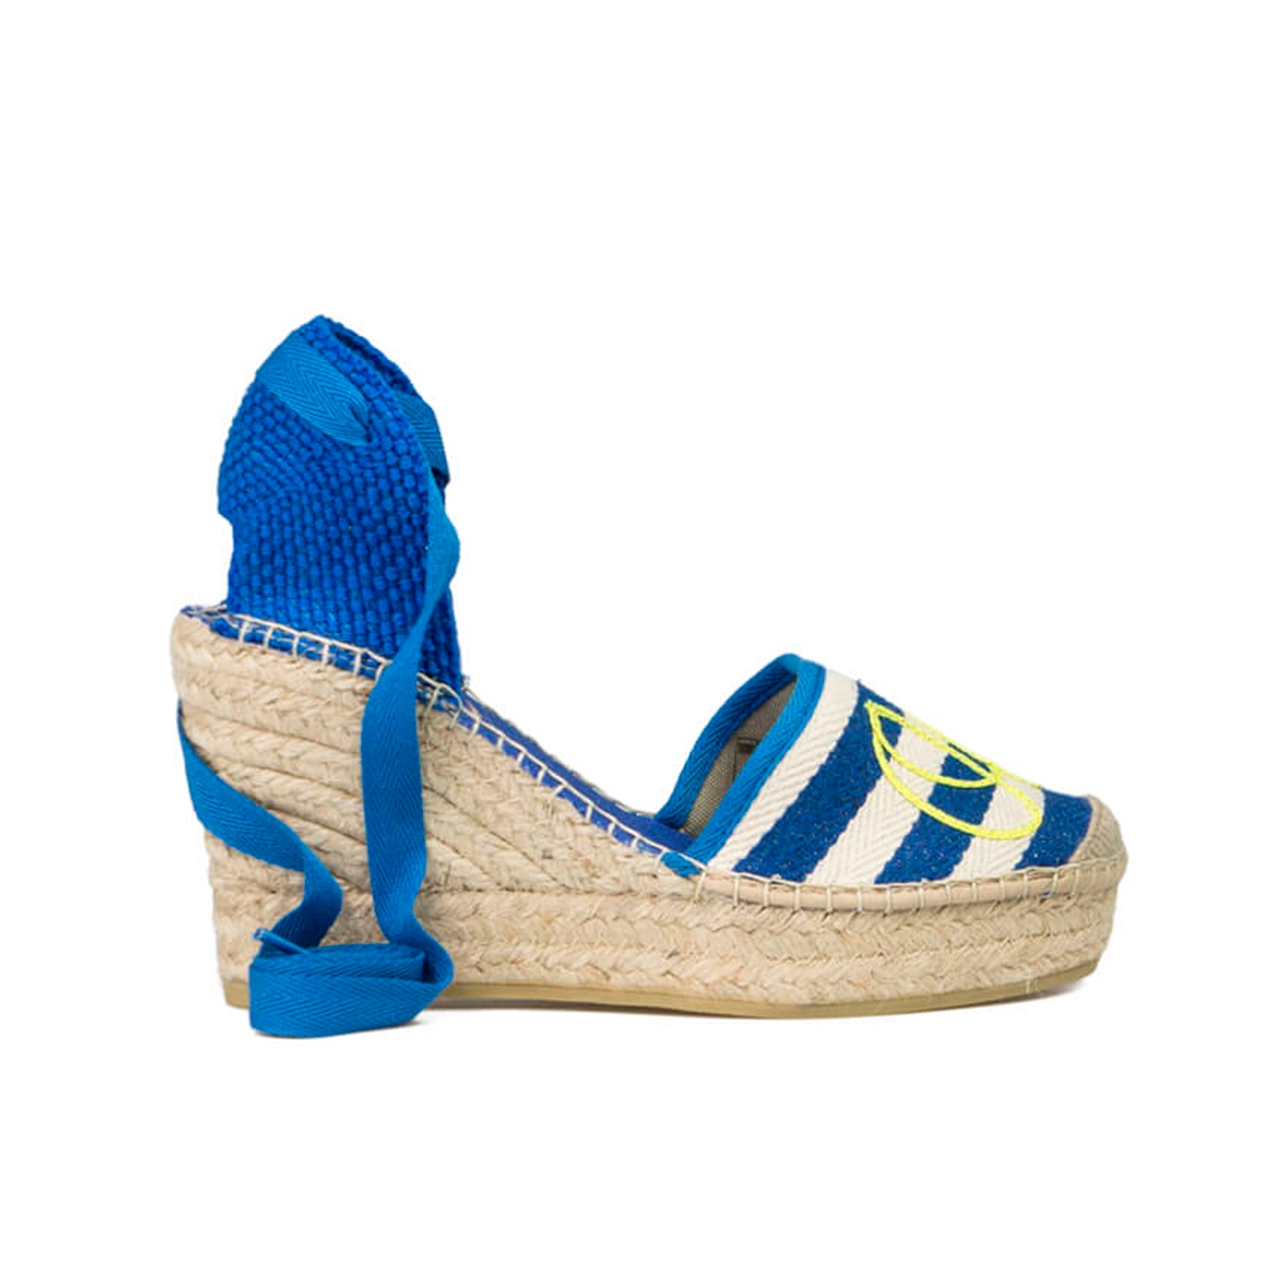 Faktisk Styre Oberst Striped Espadrilles with Text